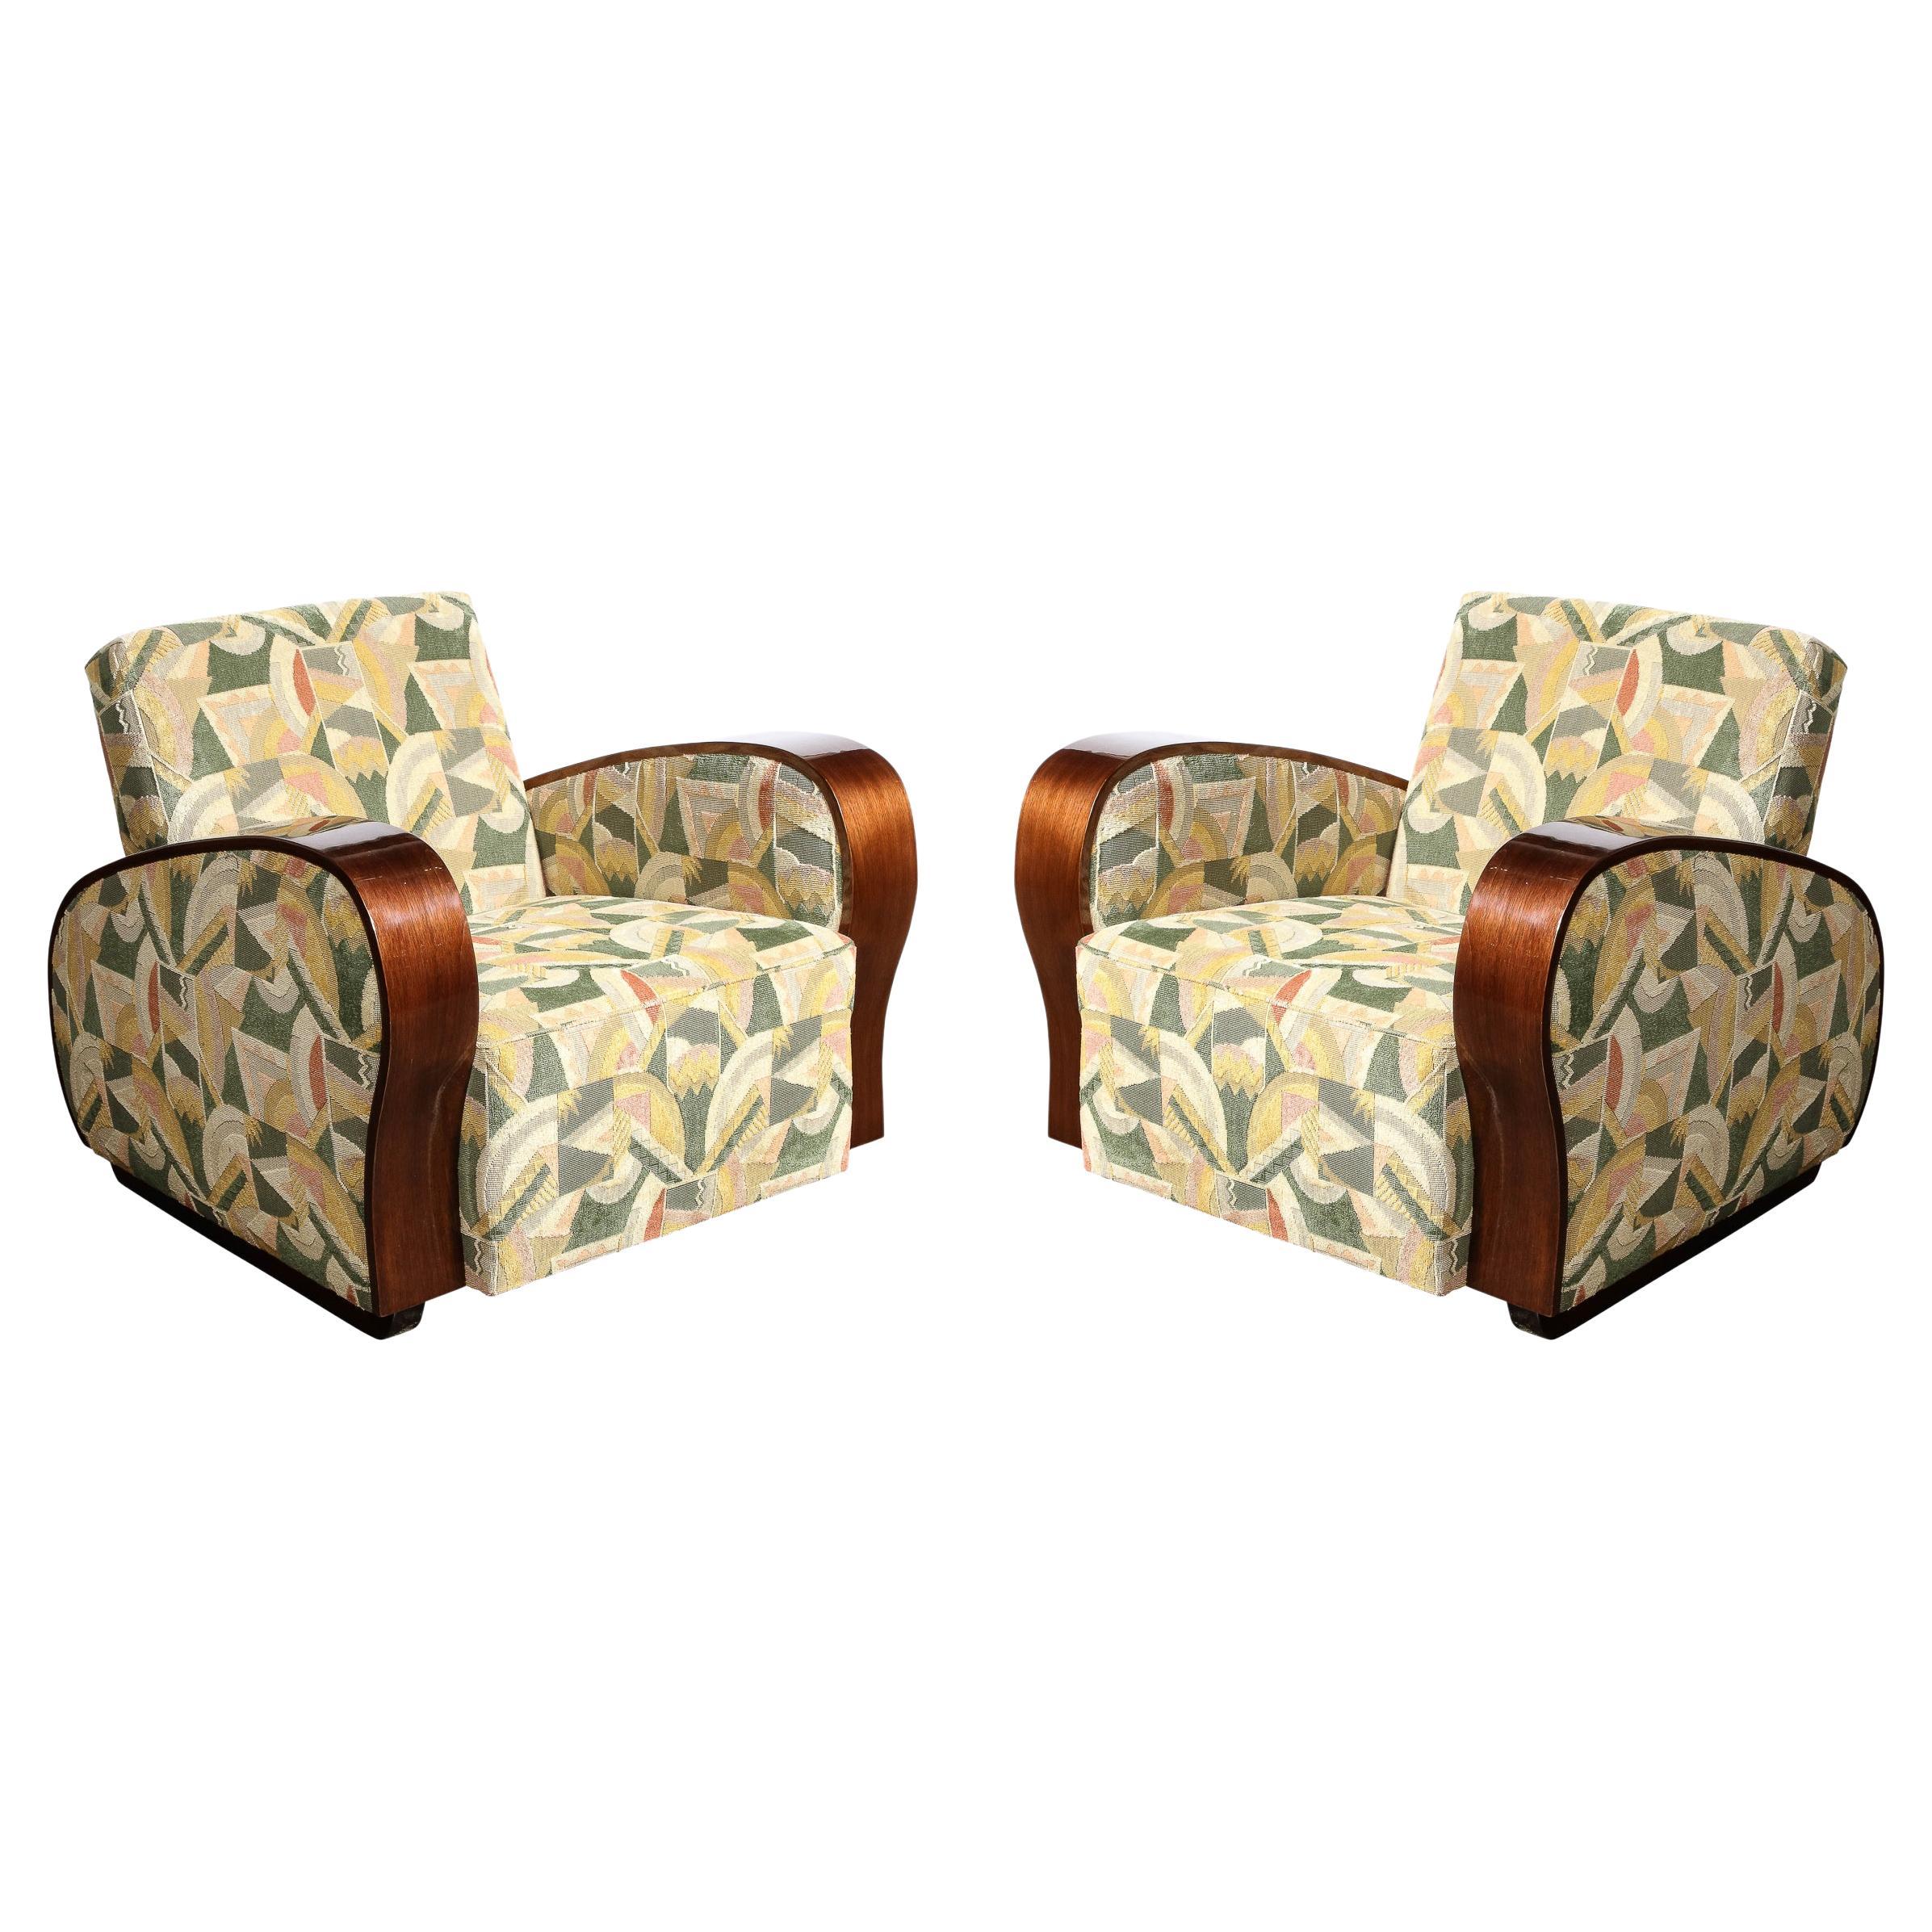 Art Deco Club/Lounge Chairs in Walnut with Rare Clarence House Upholstery For Sale